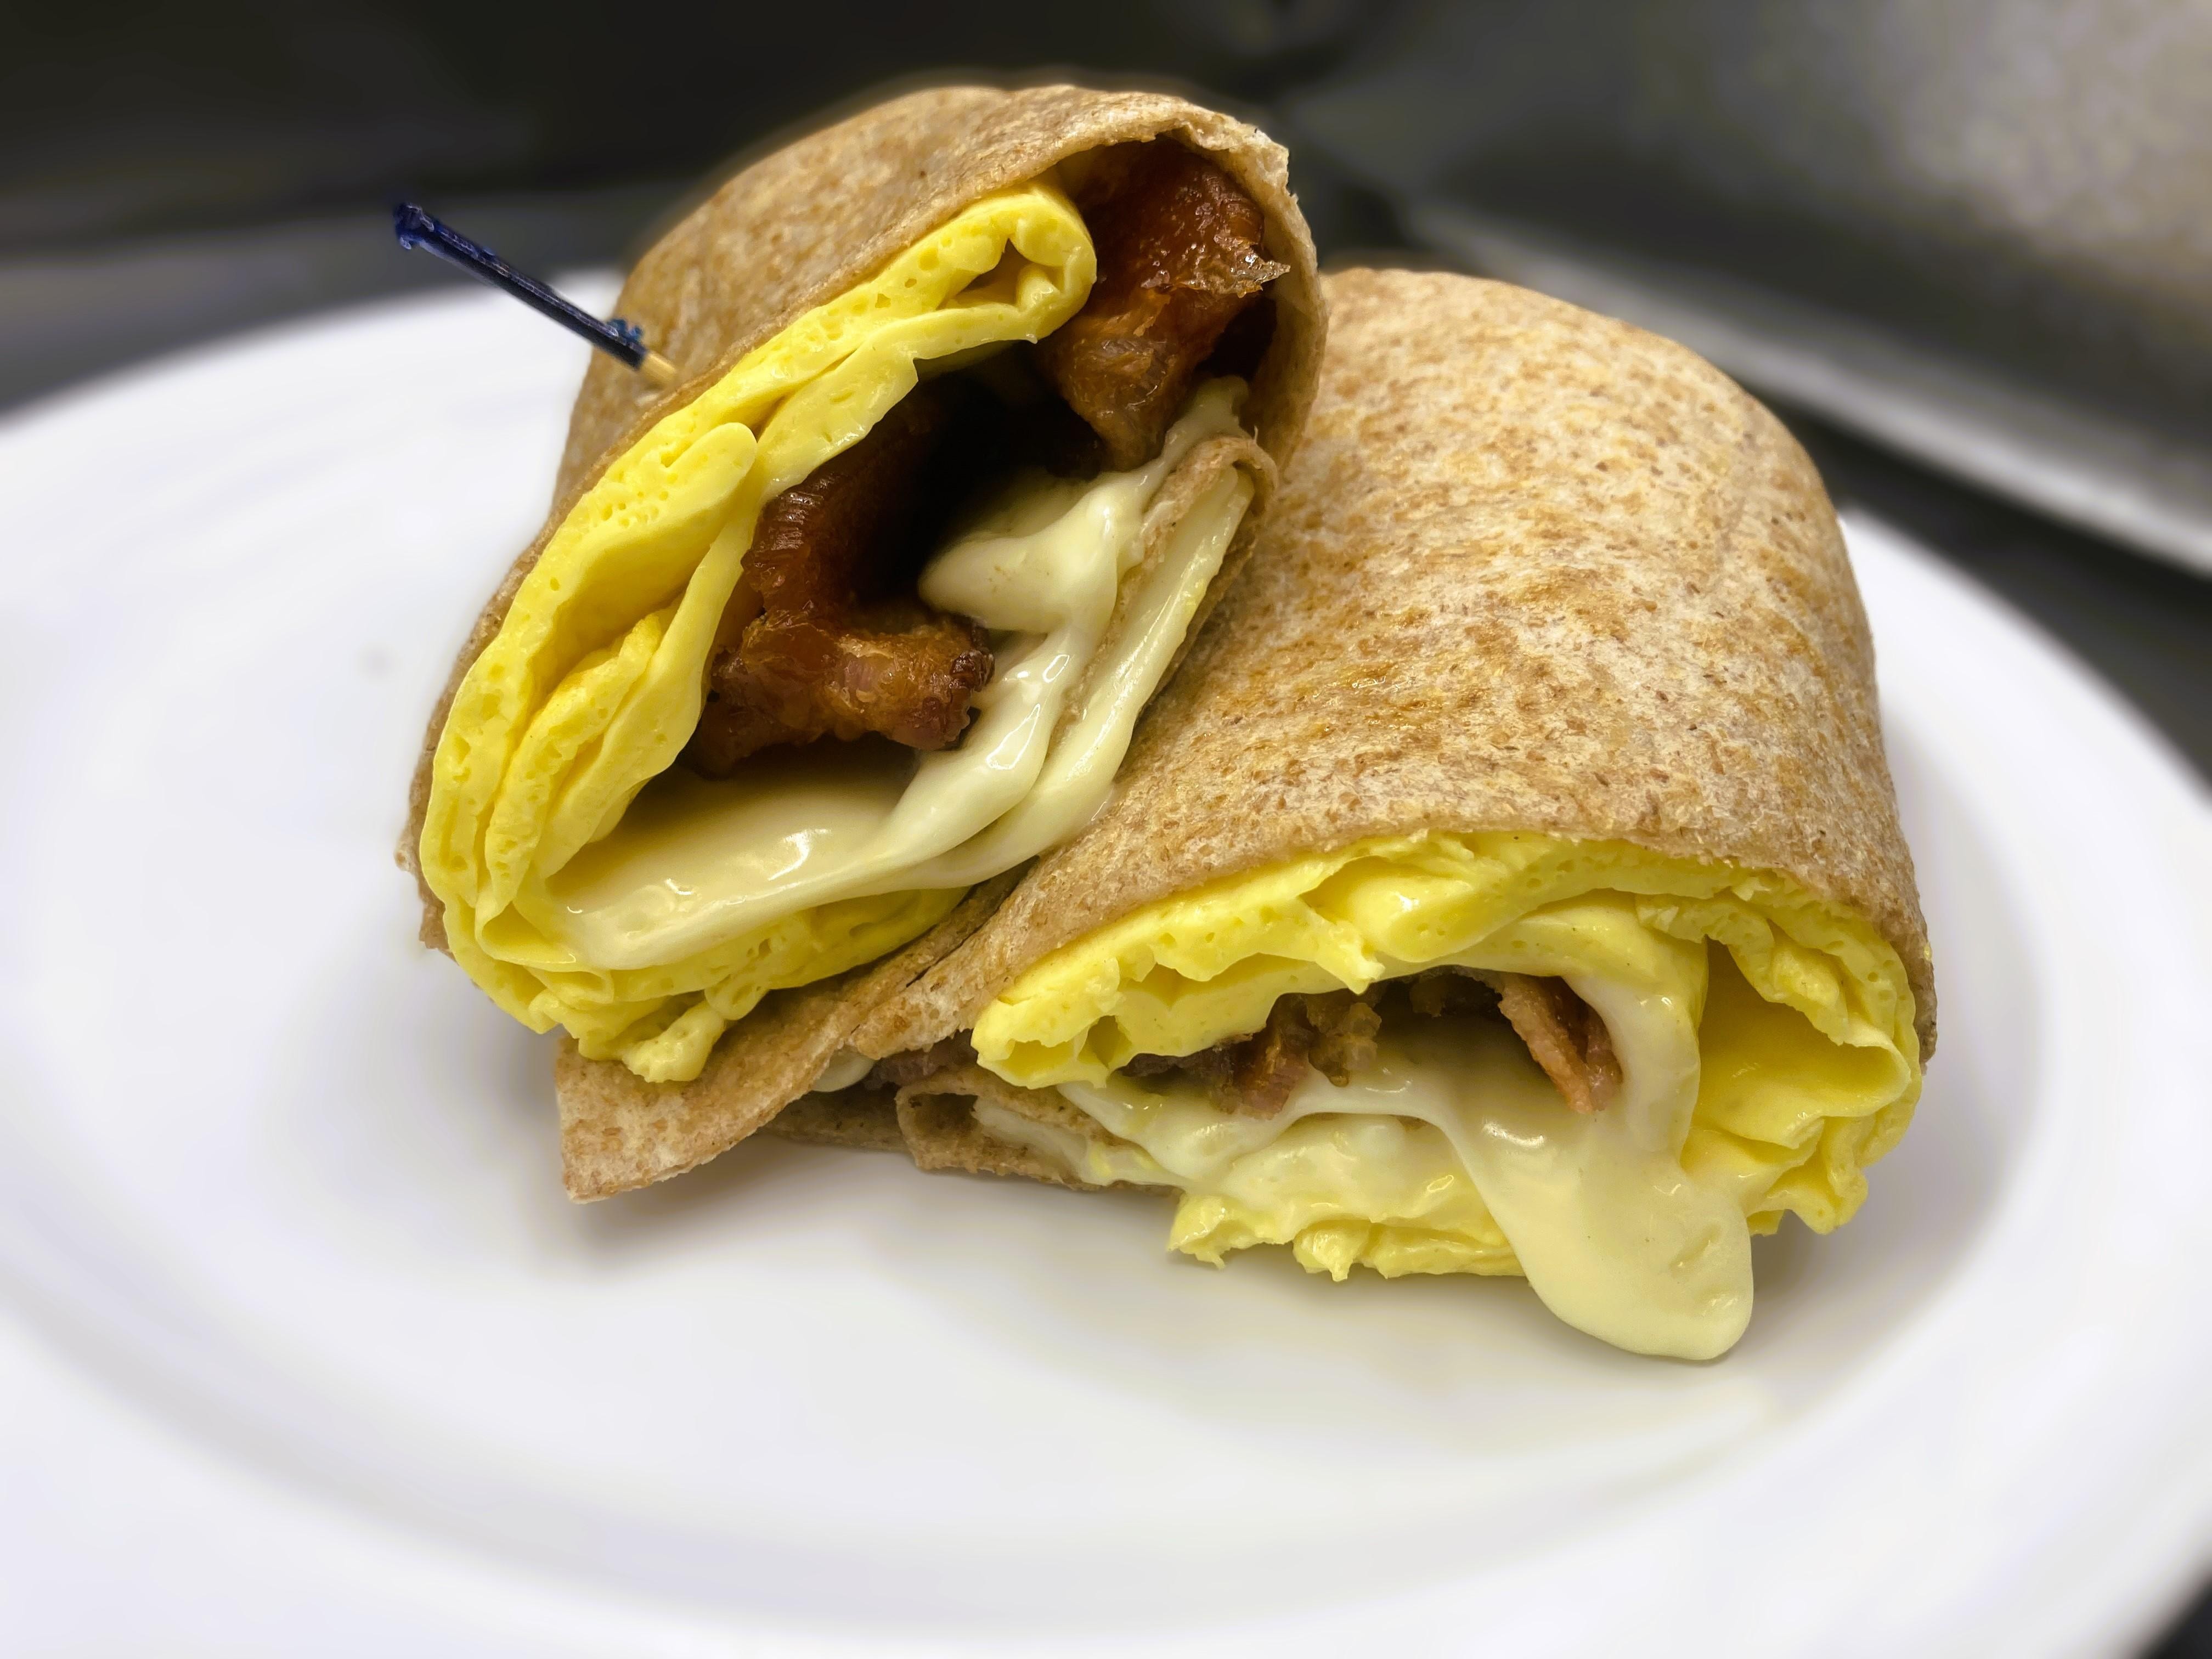 MEAT EGG CHEESE WRAP